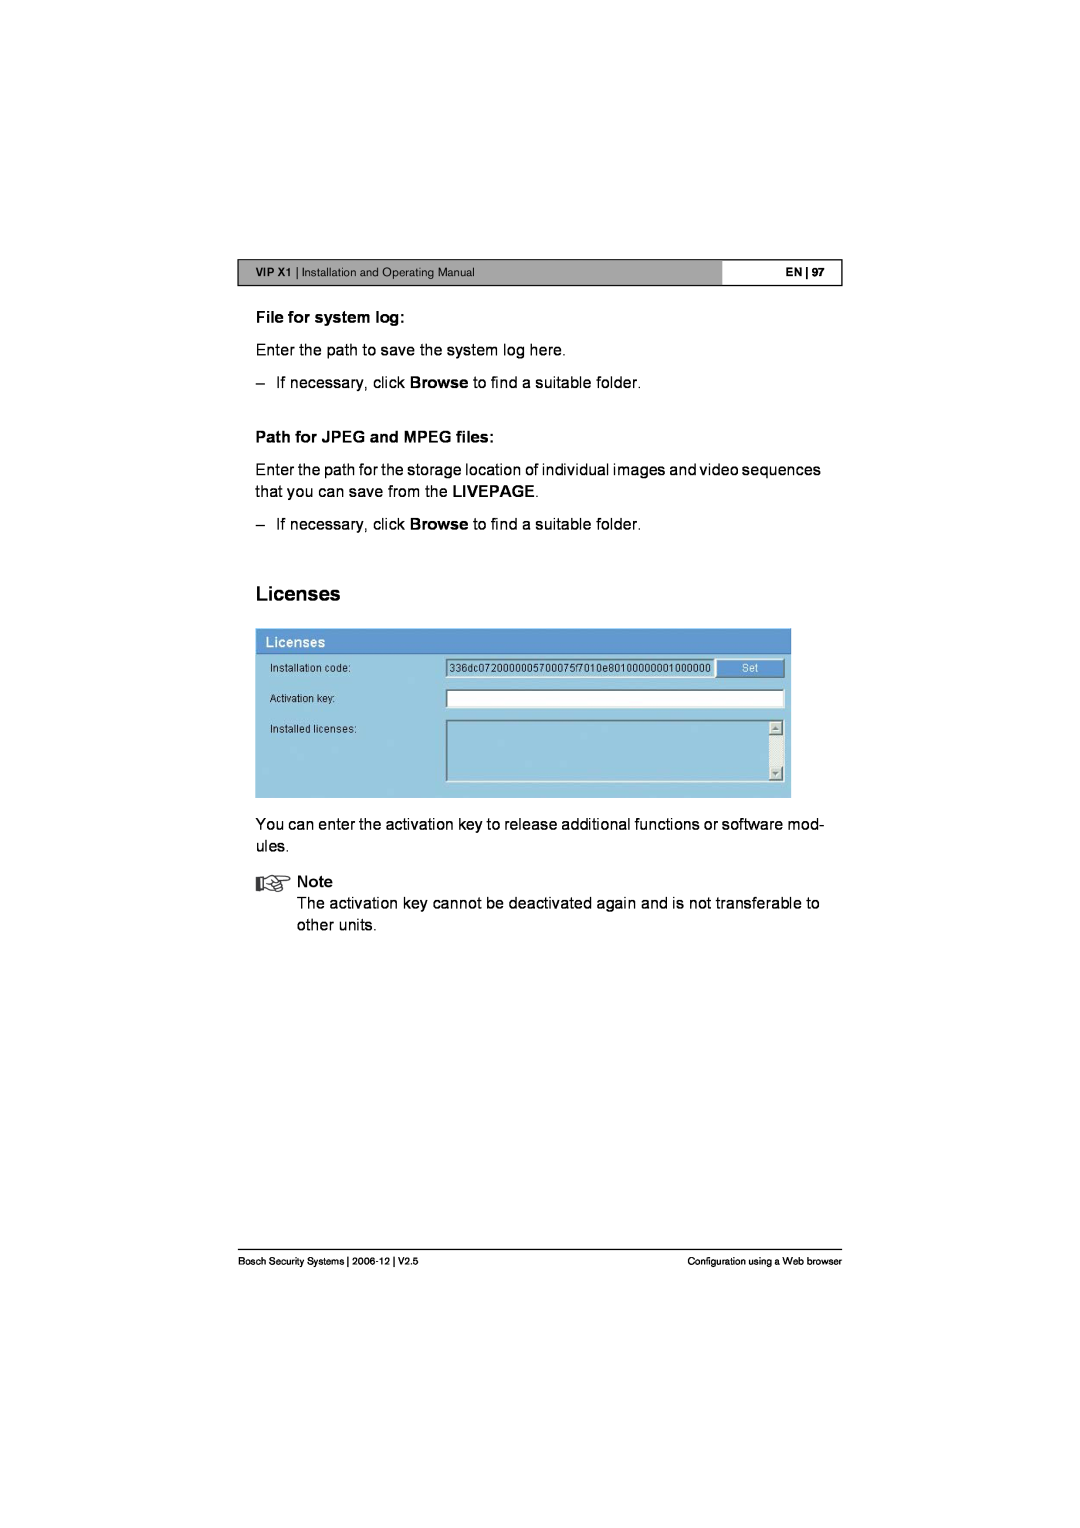 Bosch Appliances VIP X1 manual Licenses, File for system log, Path for JPEG and MPEG files 